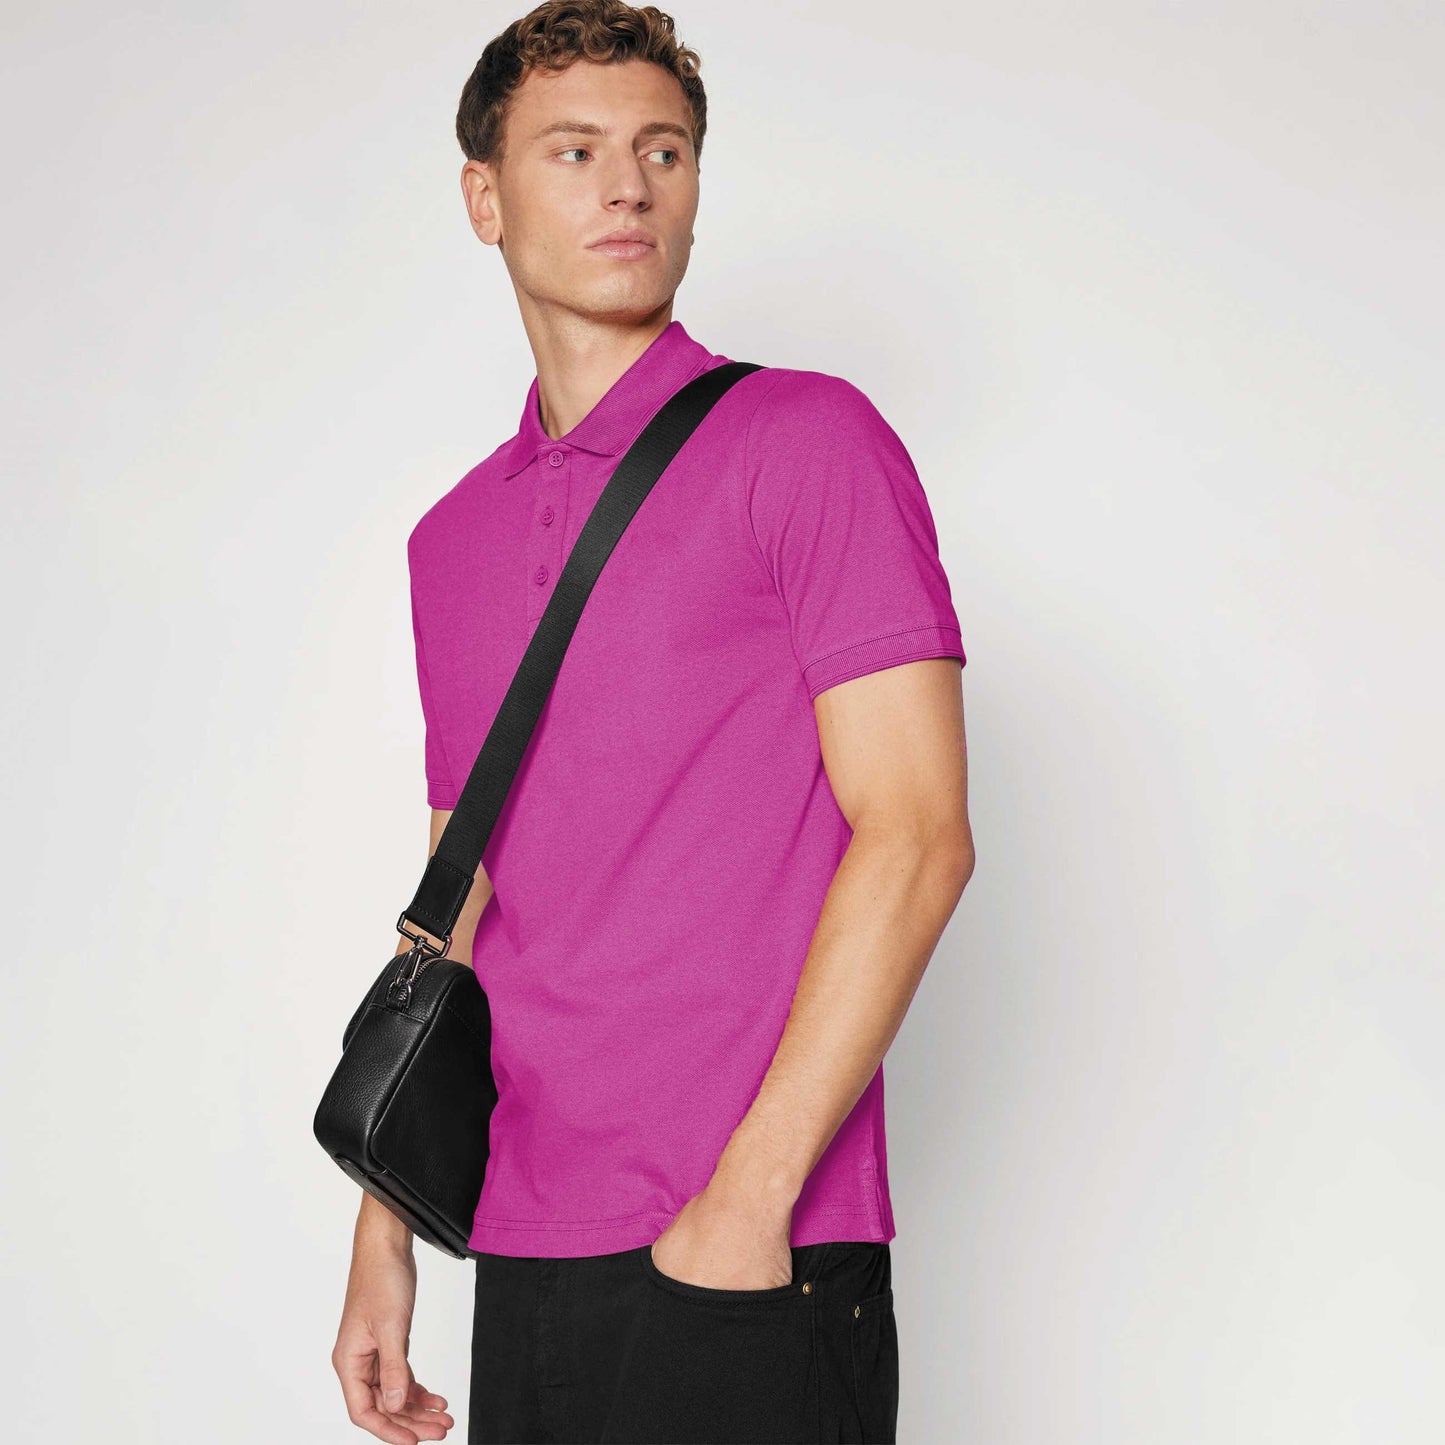 Platic Men's Short Sleeve with Minor Fault Polo Shirt Minor Fault Image Pink XS 